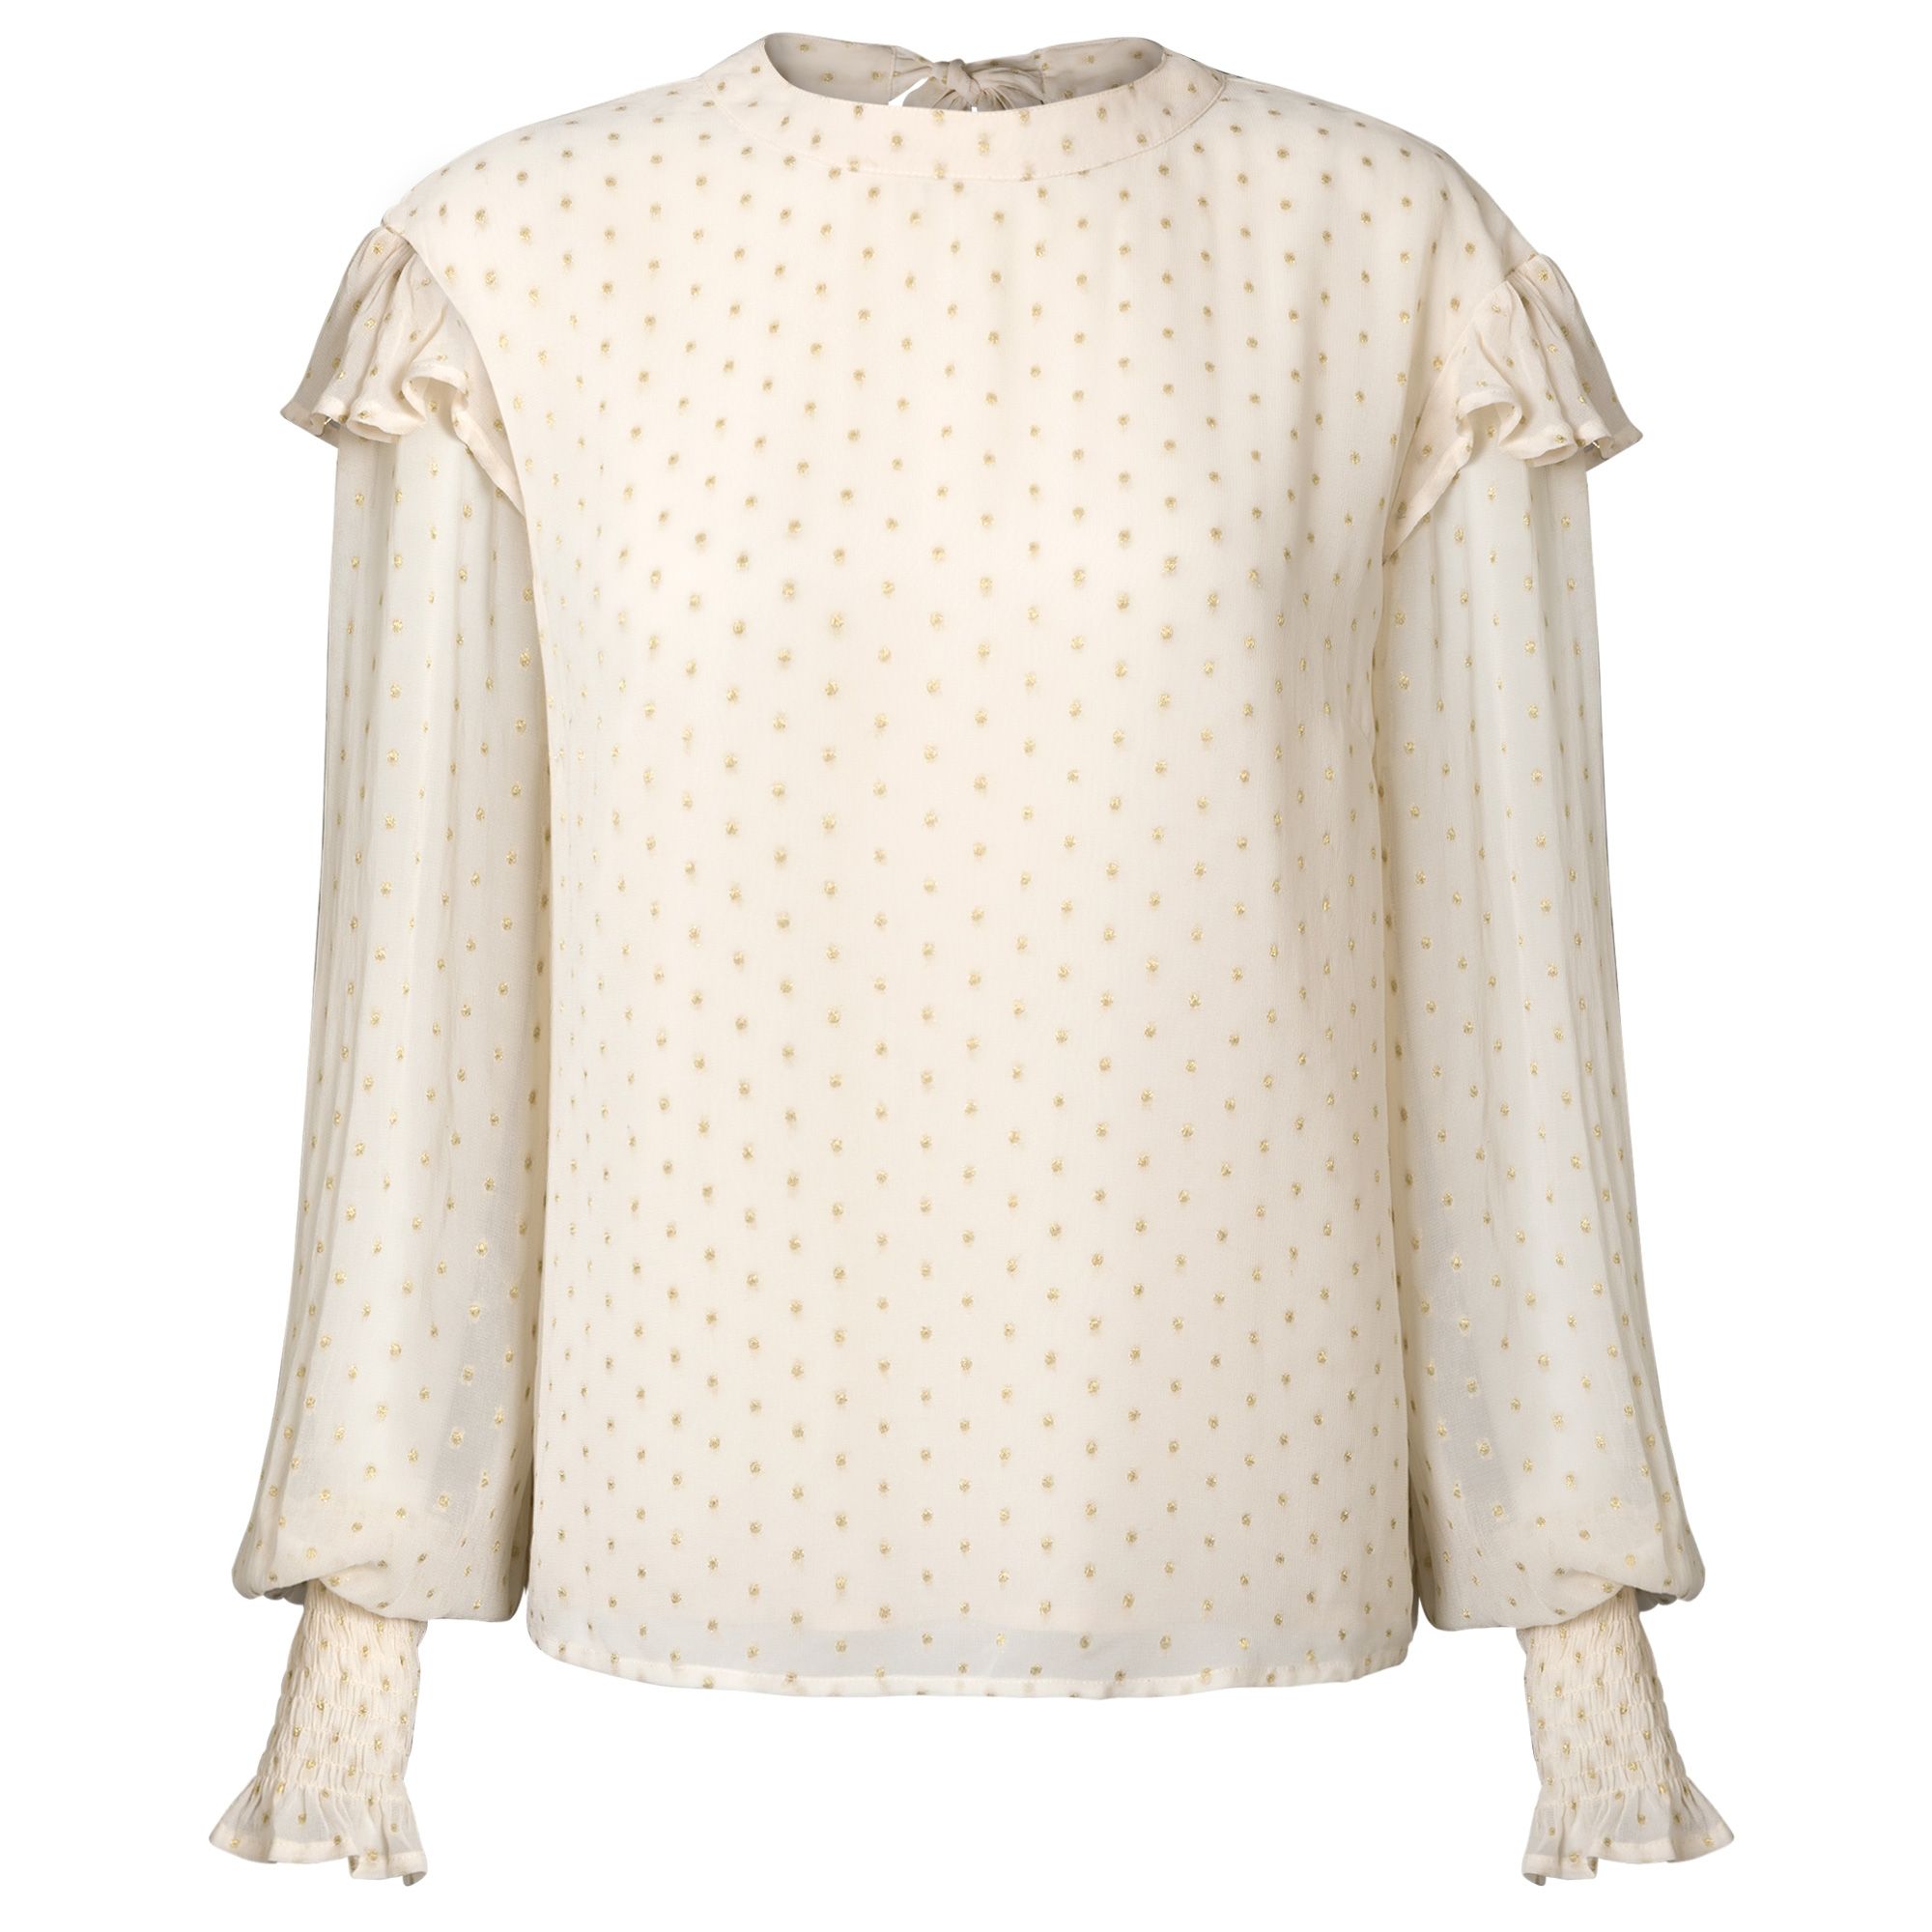 Pearly Spot Frill Top | Oliver Bonas